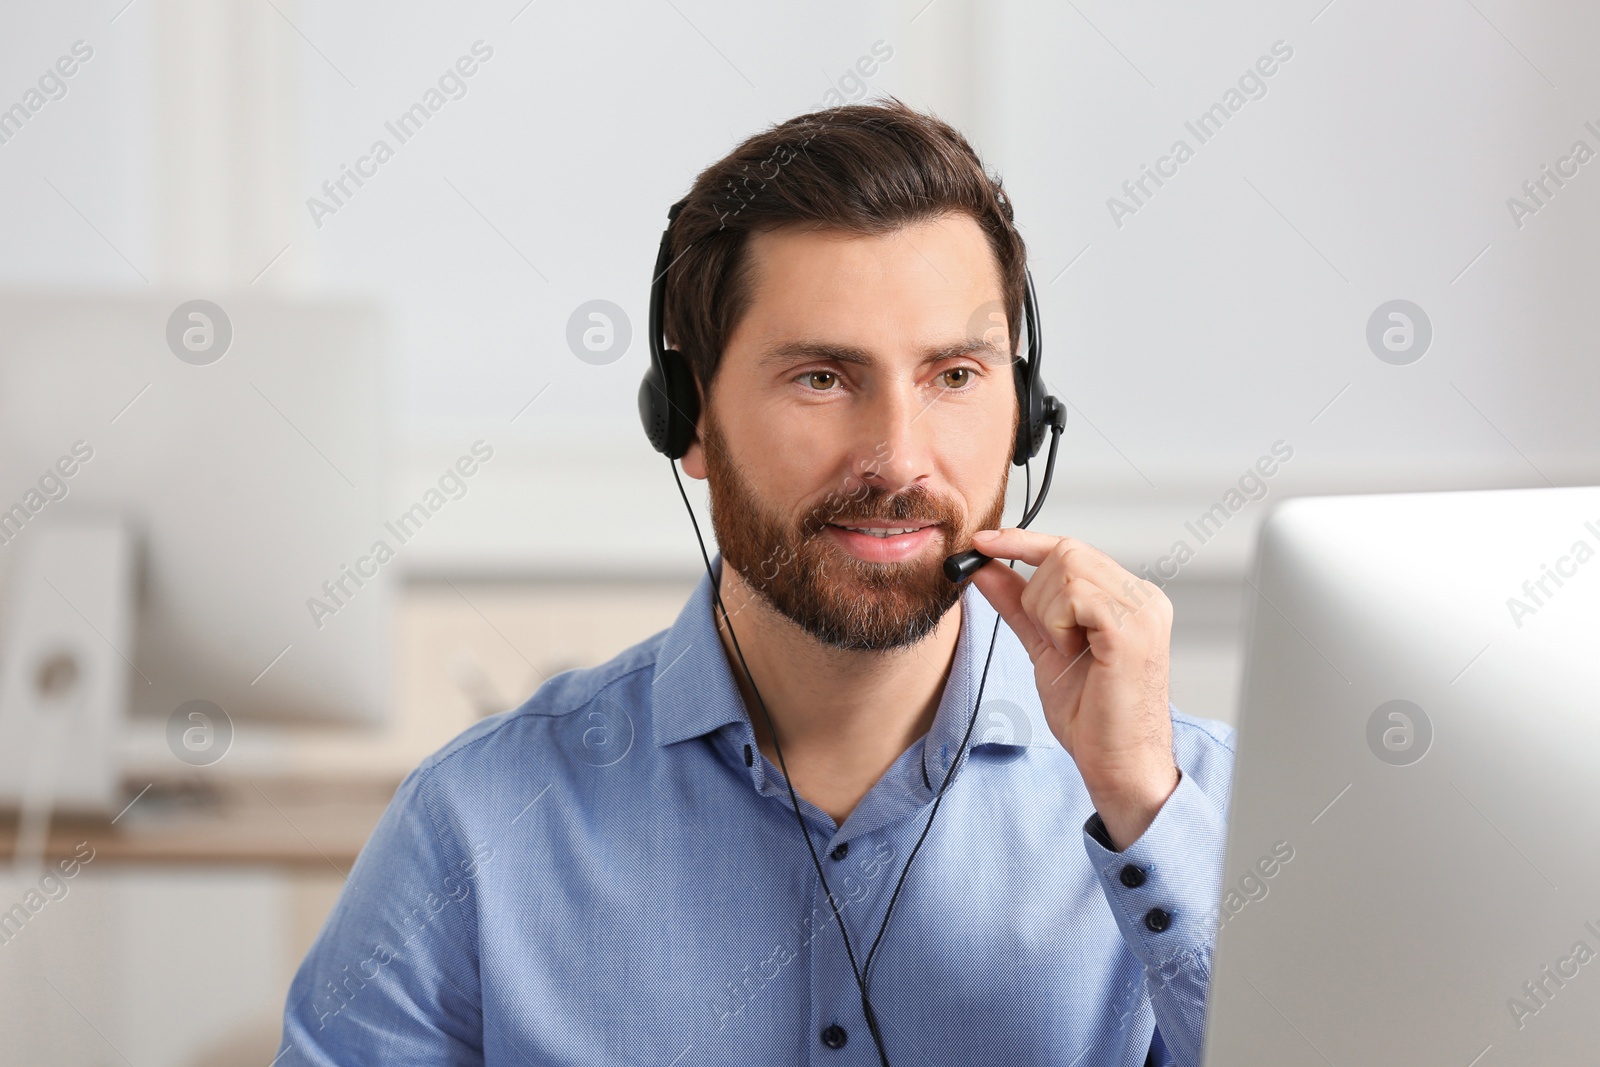 Photo of Hotline operator with headset working in office